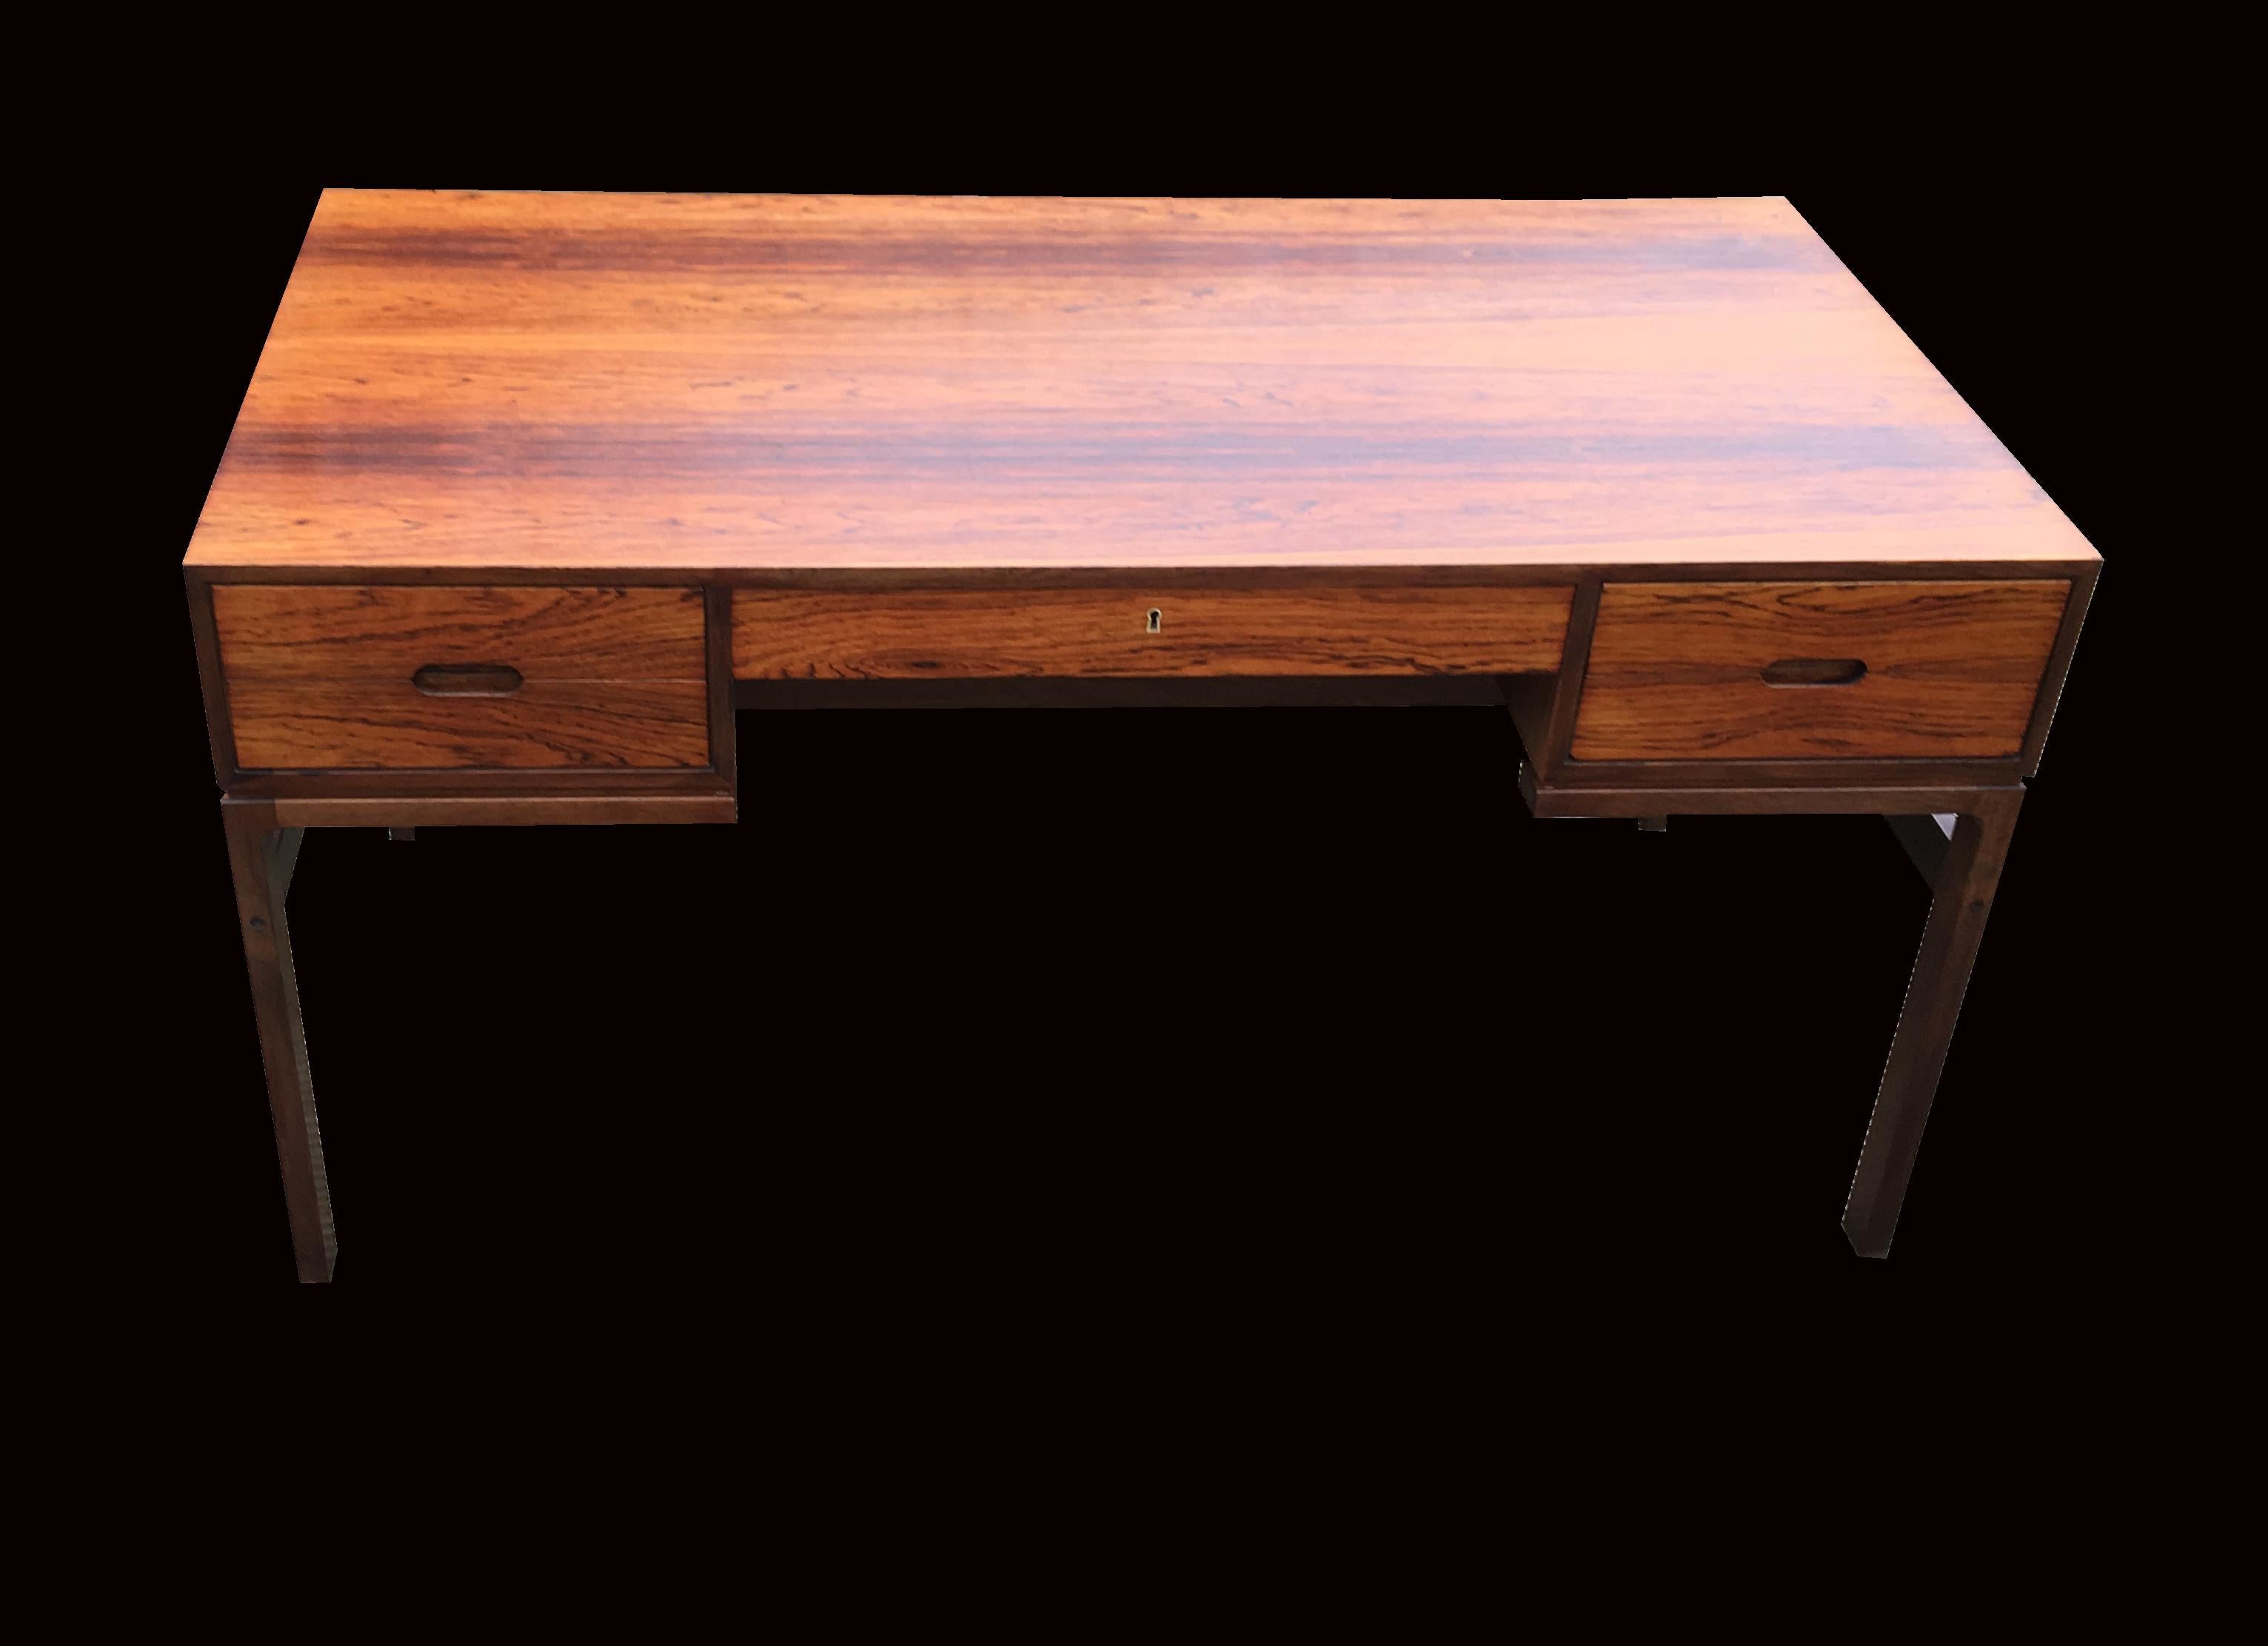 This scarce and beautiful desk was designed in the 1960s by Arne Wahl Iversen and produced in the same decade in rosewood by Vinde Mobelfabrik. It is in very good original condition.